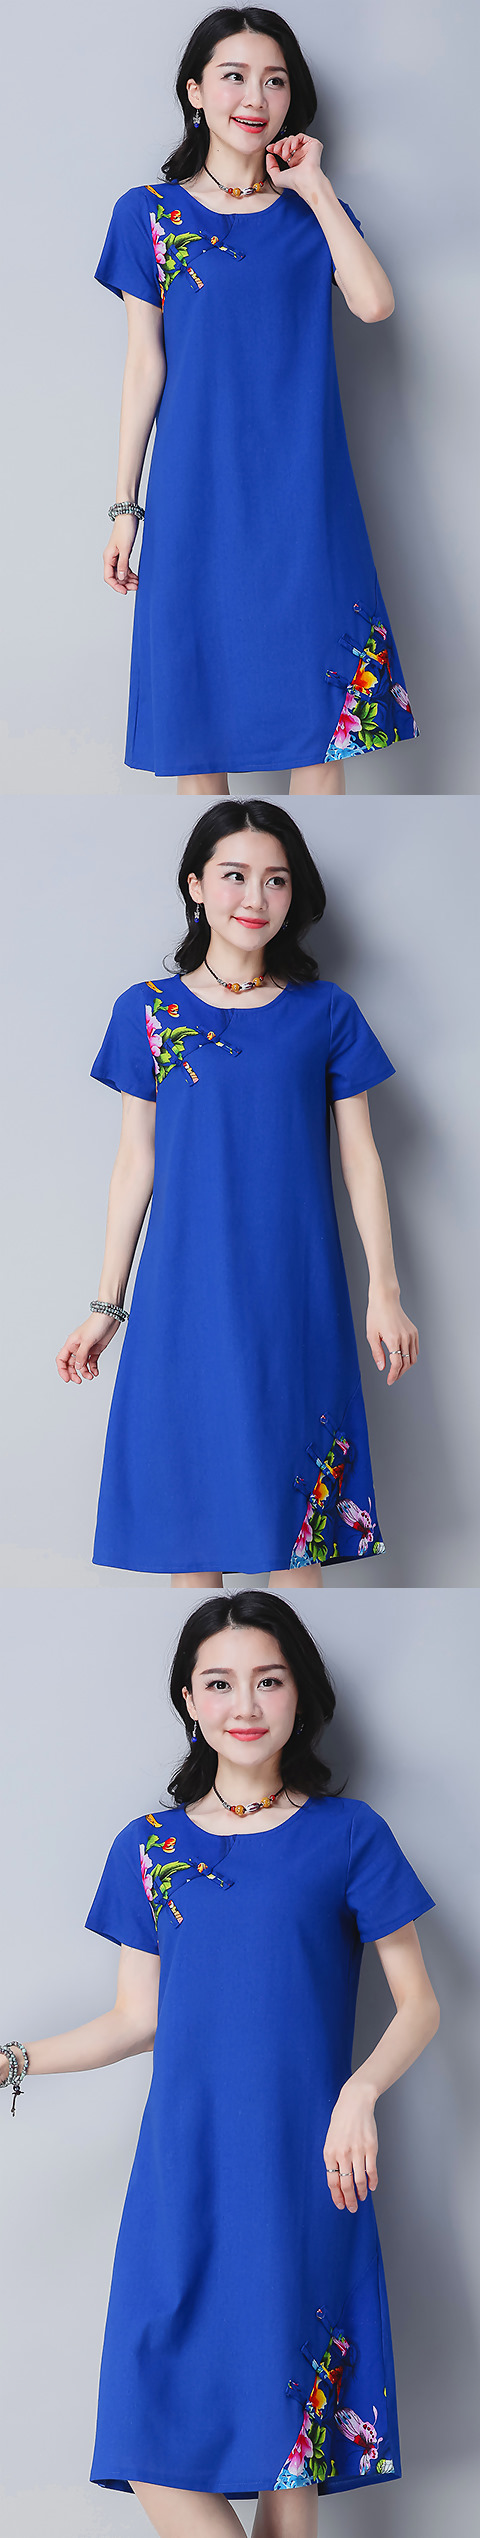 Ethnic Short-length Dress with patches-Navy Blue (RM)